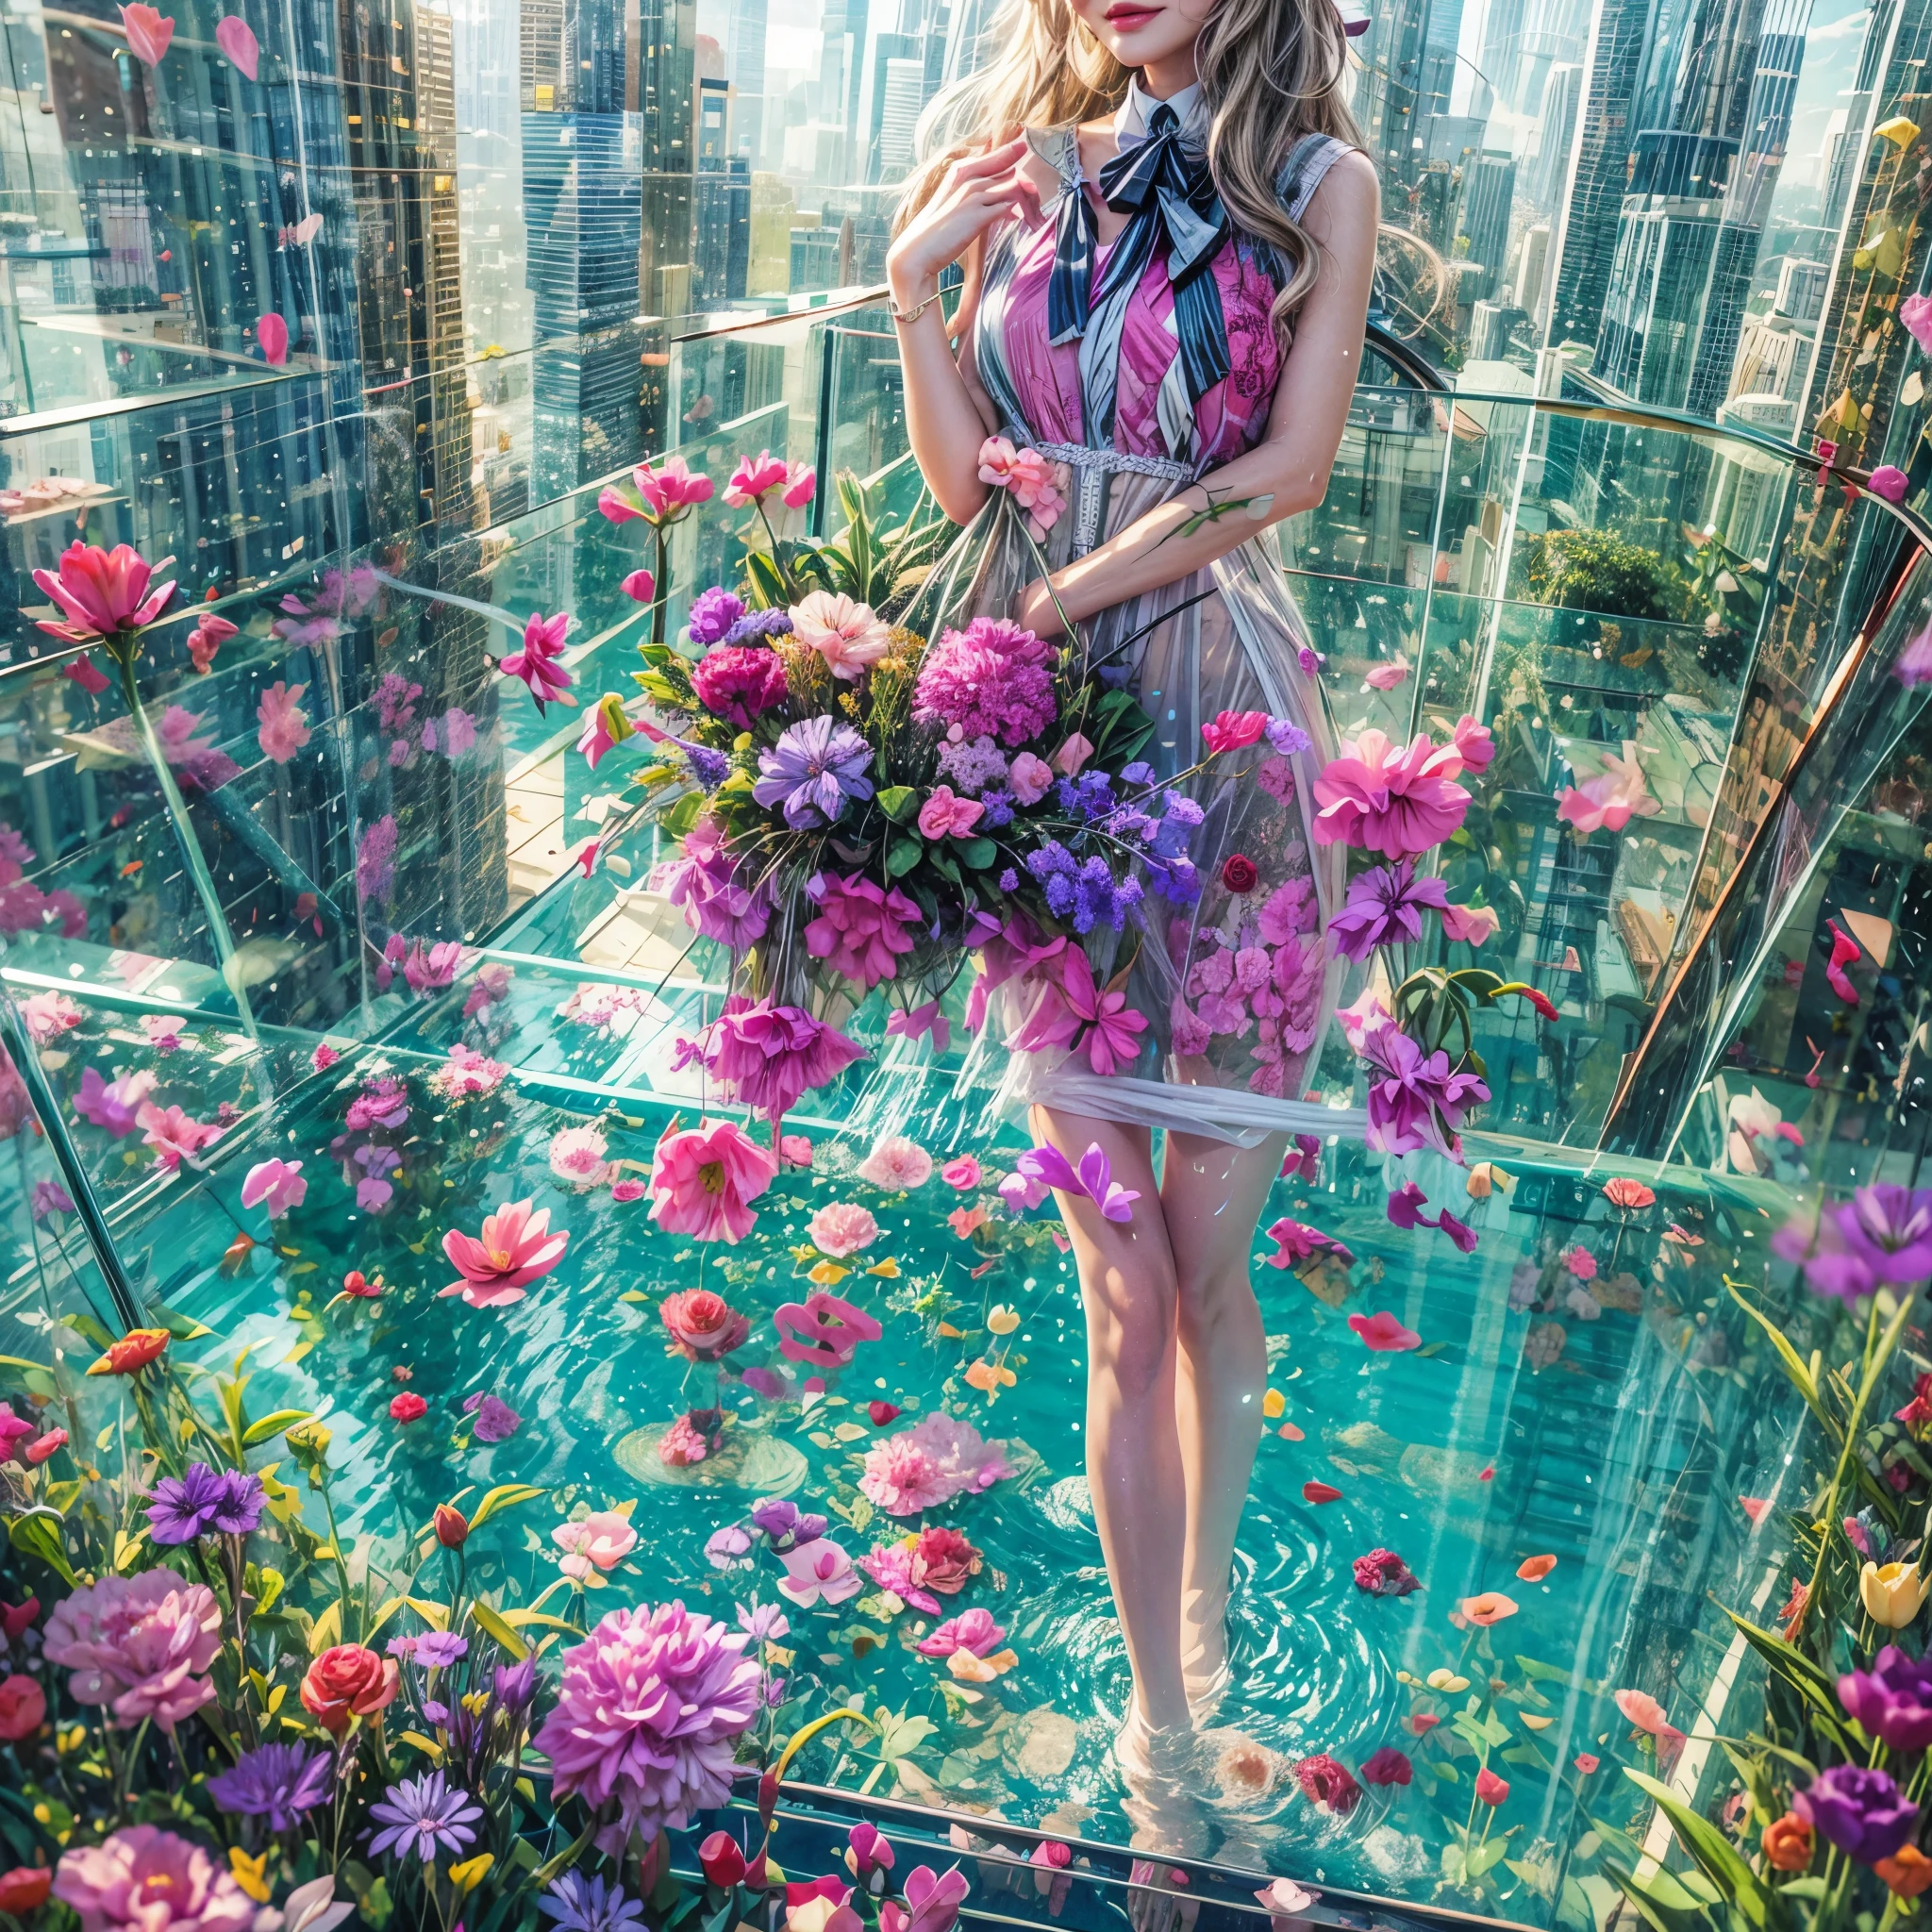 BloodRed, White in Pearly RainbowColors,ExtremelyDetailed(ProfessionalPhoto of Girl Floating in the Sky:1.37)ZoomLayer{Stunning|Mystic|GodRays|Haze}, 57th floor infinity pool in the urban forest. (Masterpiece 8K TopQuality:1.2)(ExtremelyDetailed NOGIZAKA face:1.37) ElaboratePupil with (SparklingHighlights:1.28) DoubleEyelids with Voluminous LongEyelashes PUNIPUNI RosyCheeks (Joyful Expressions LifeLike Rendering) MotionBlur  BREAK  (Acutance:0.77) PUNIPUNI Radiant Impeccable PearlSkin with Transparency White(Skinny SchoolSwimwear) {(HiddenHand)|((Corrected BabyLike Hand))} Whole Body Proportions and all limbs are Anatomically Accurate, {Carnation|Tulips|(Rose)} [FlowerWreath WrappedBody Full of Flowers Covering girl's body] {((Dazzling RainbowColorHorizon))|ColorfulSky|ColoredClouds|(Starly Particles)}(extra limbs:-1.4)(Not Detailed Face:-1.37)(Not Detailed Hand:-1.28), Drawing infinity pool reference to the rooftop of Marina Bay Sands